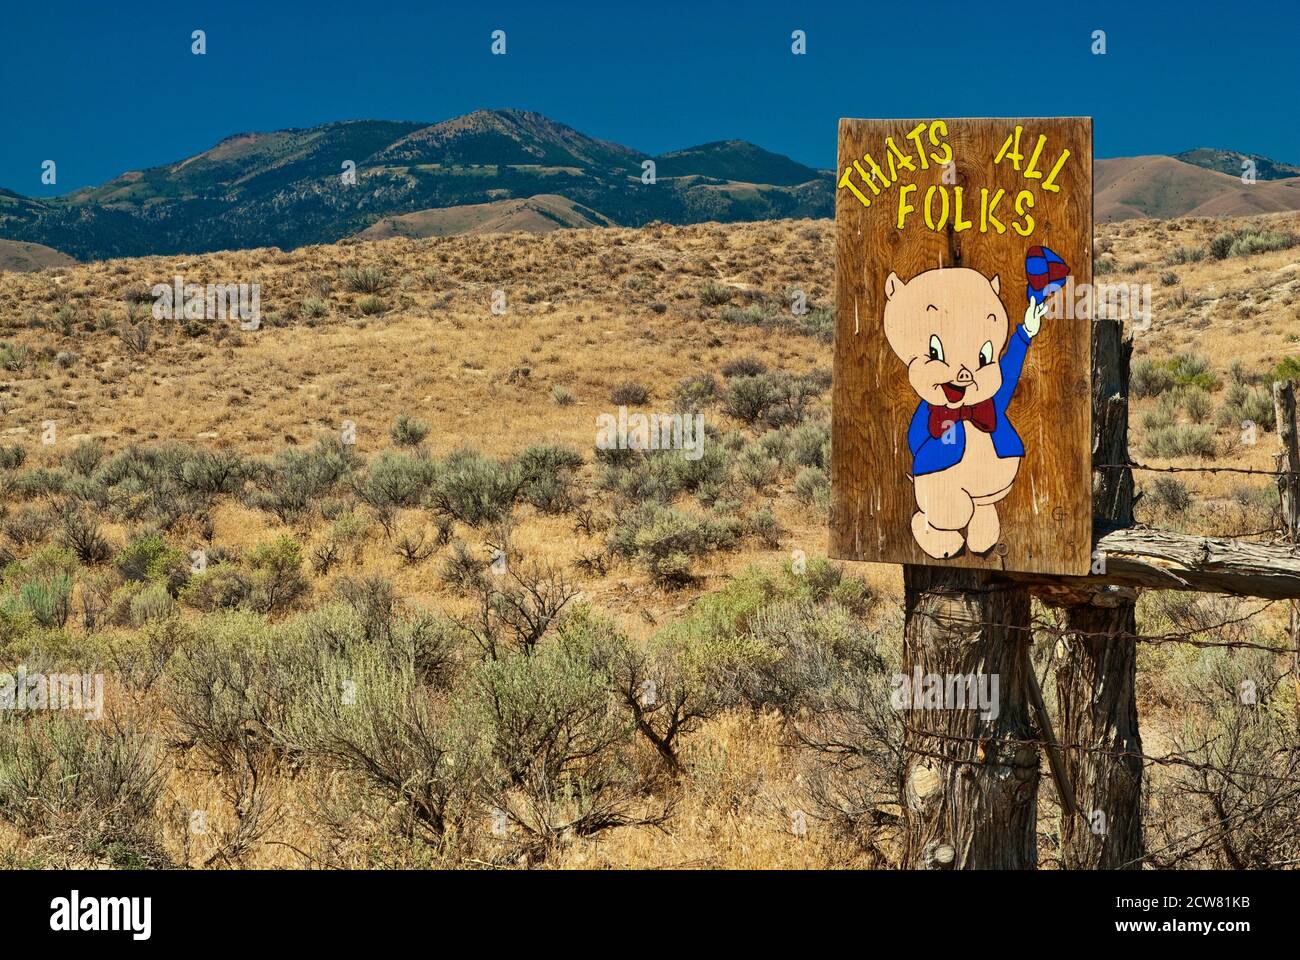 Porky Pig from Looney Tunes cartoons, sign in shrubland at ranch in Owyhee Mountains, High Desert region, Idaho, USA Stock Photo